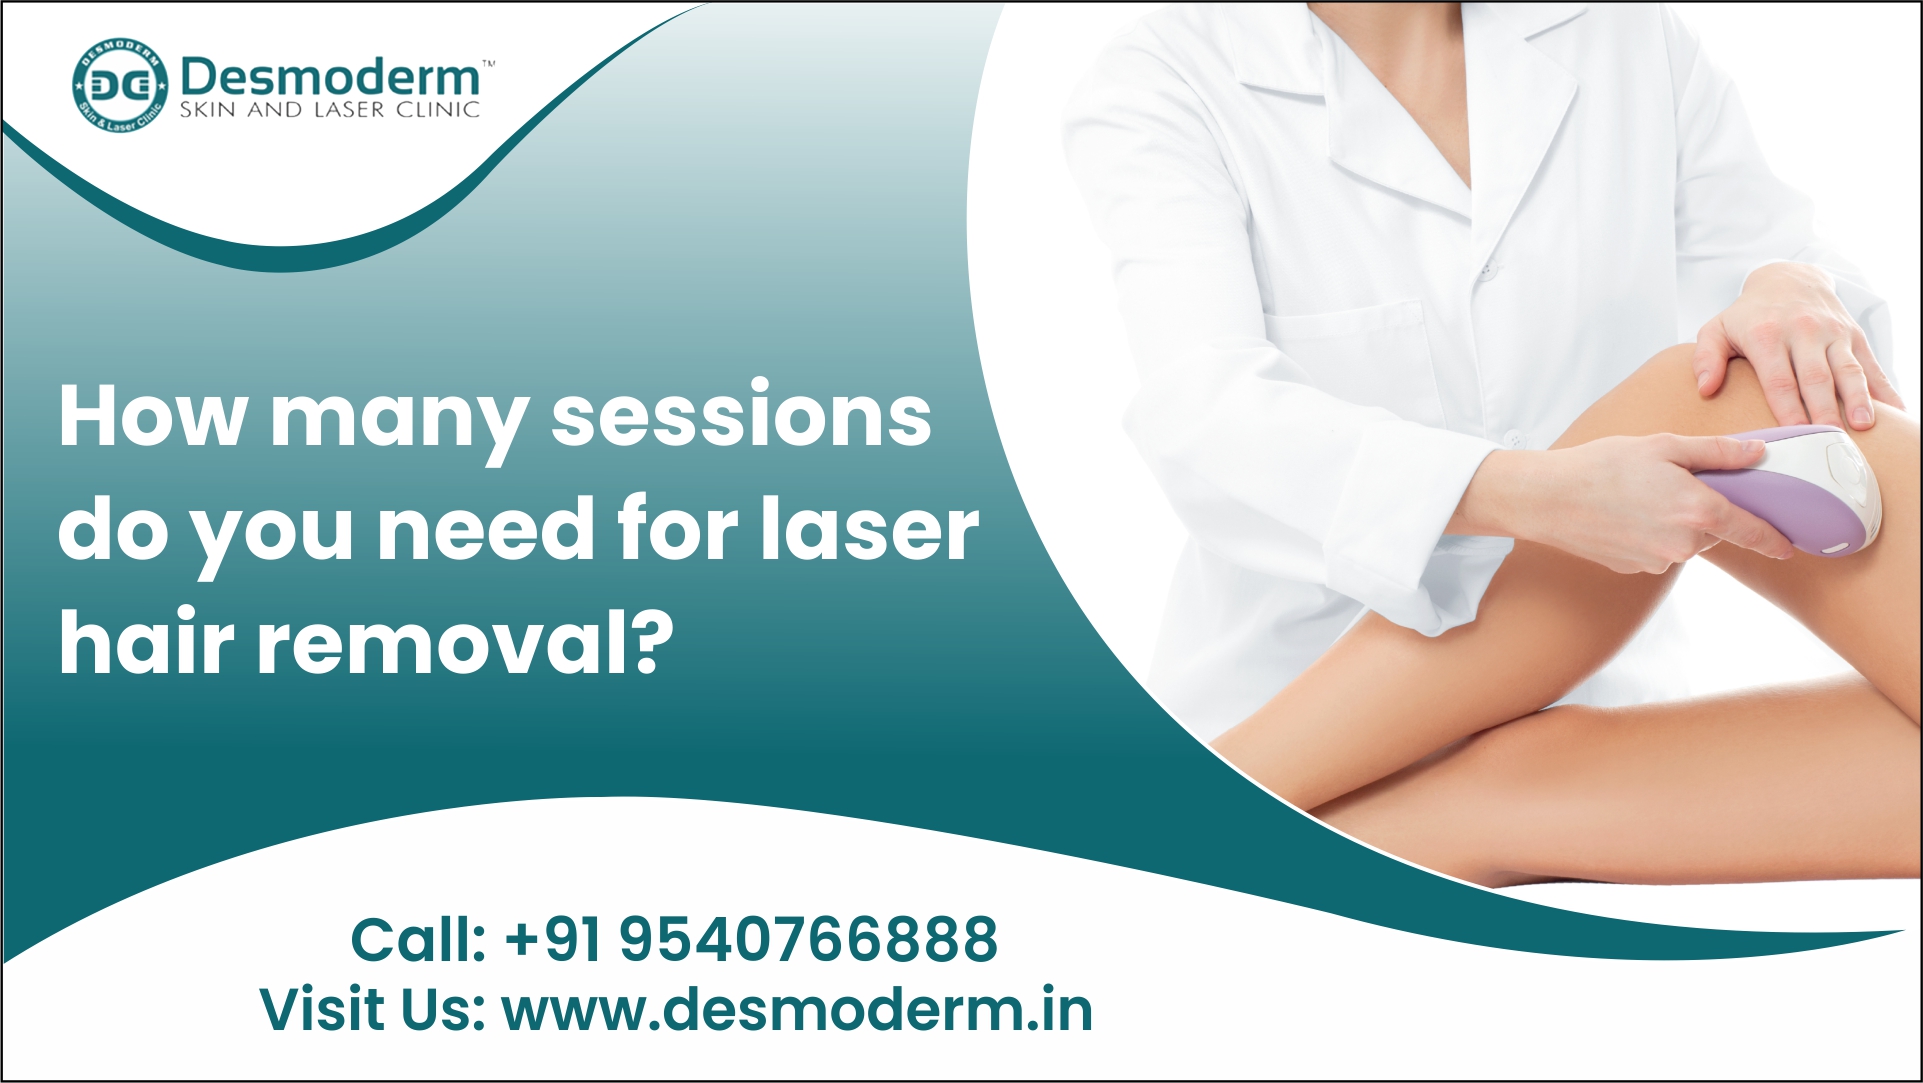 How many sessions do you need for laser hair removal?